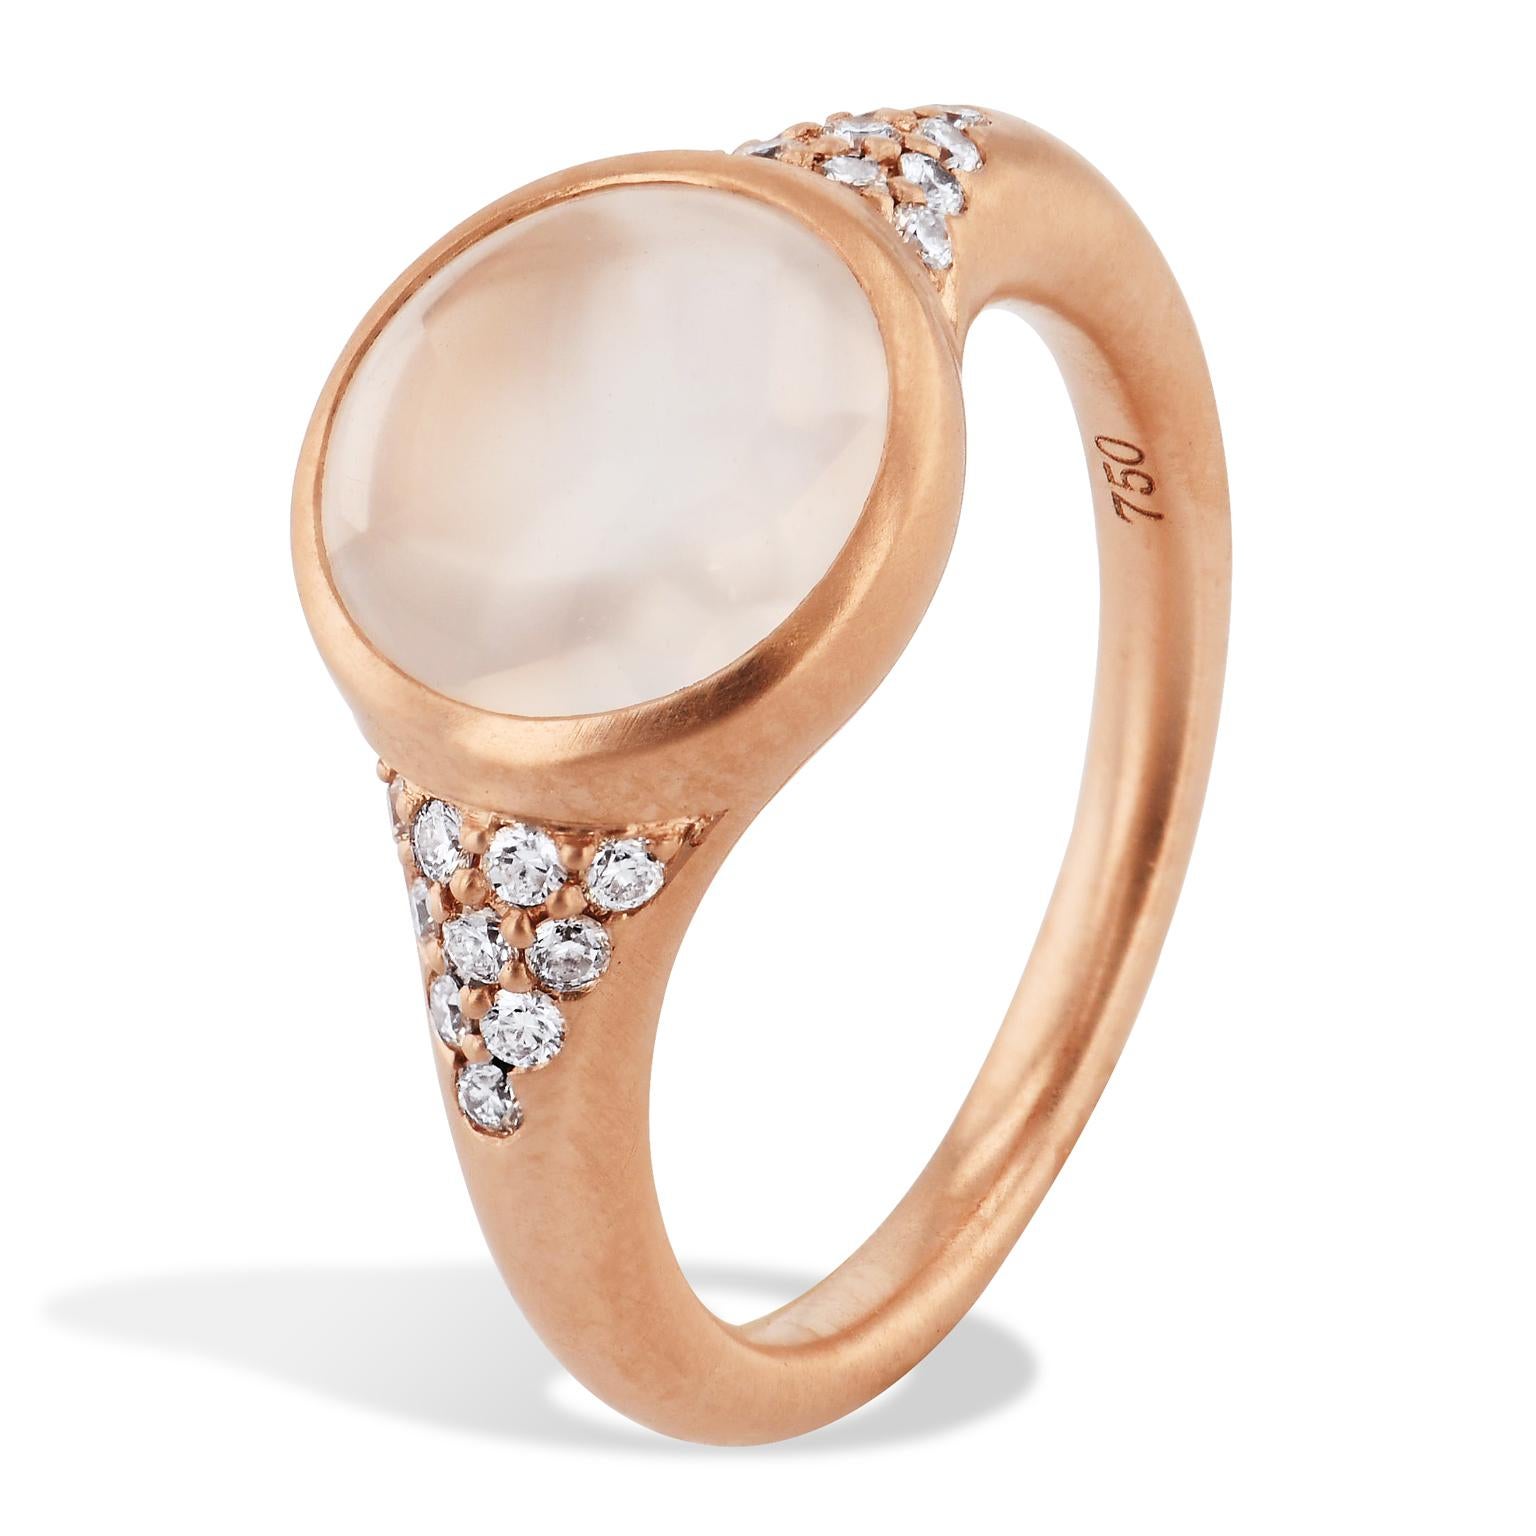 No need to look outside to see the moon. With this ring you will have it always on your fingers. Admire this cabochon cut Moonstone bezel set in a satin finished rose gold ring with pave-set diamonds, and never worry about a cloudy sky to spoil your